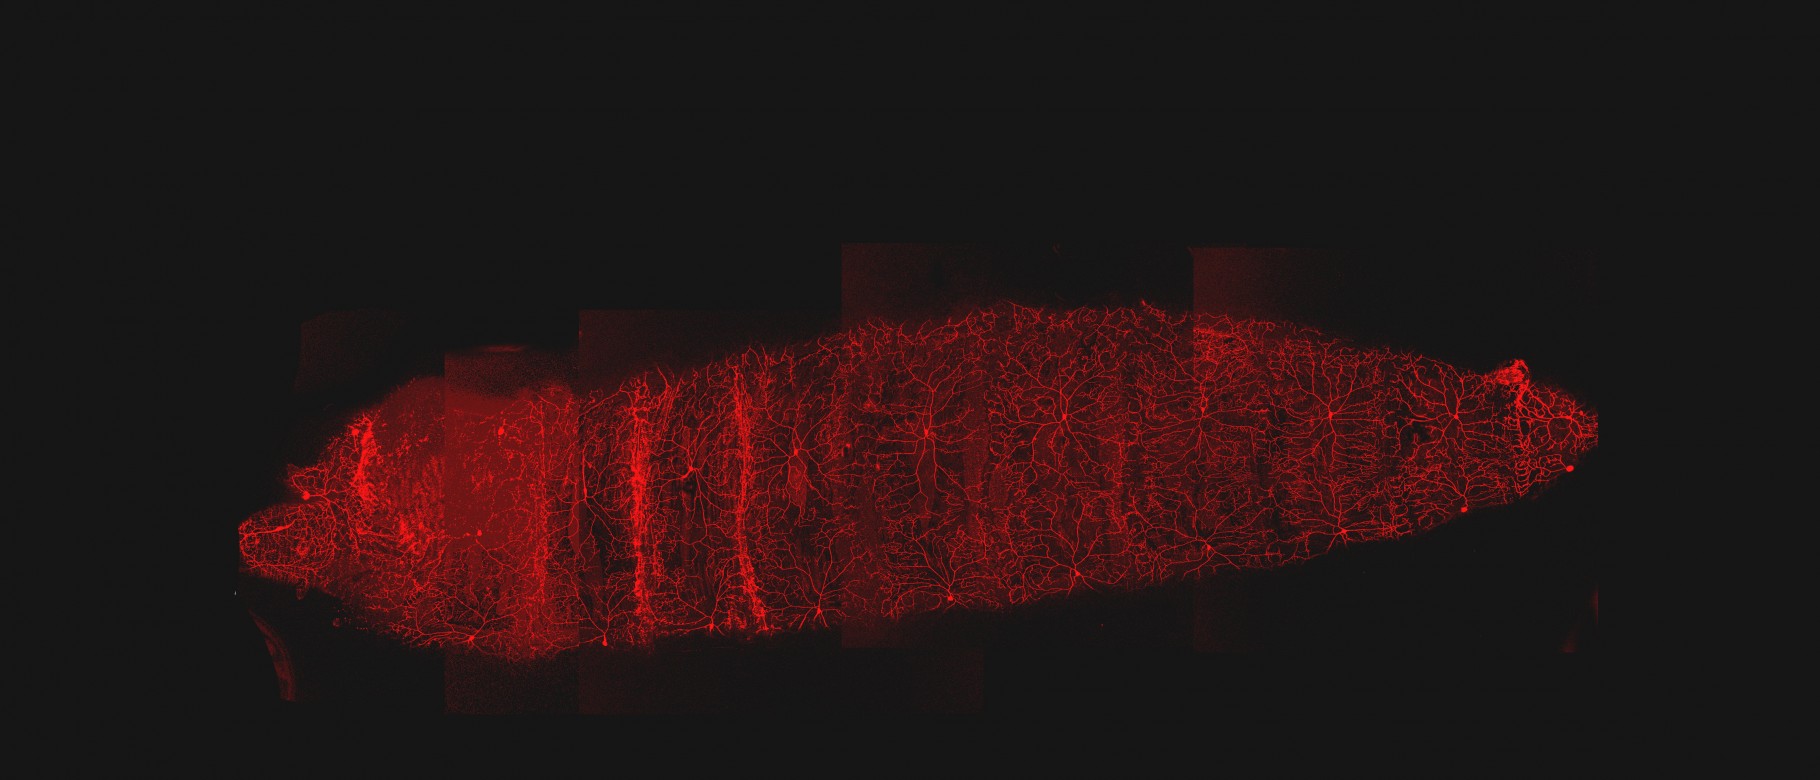 Nociceptive neurons in a fruit fly larva